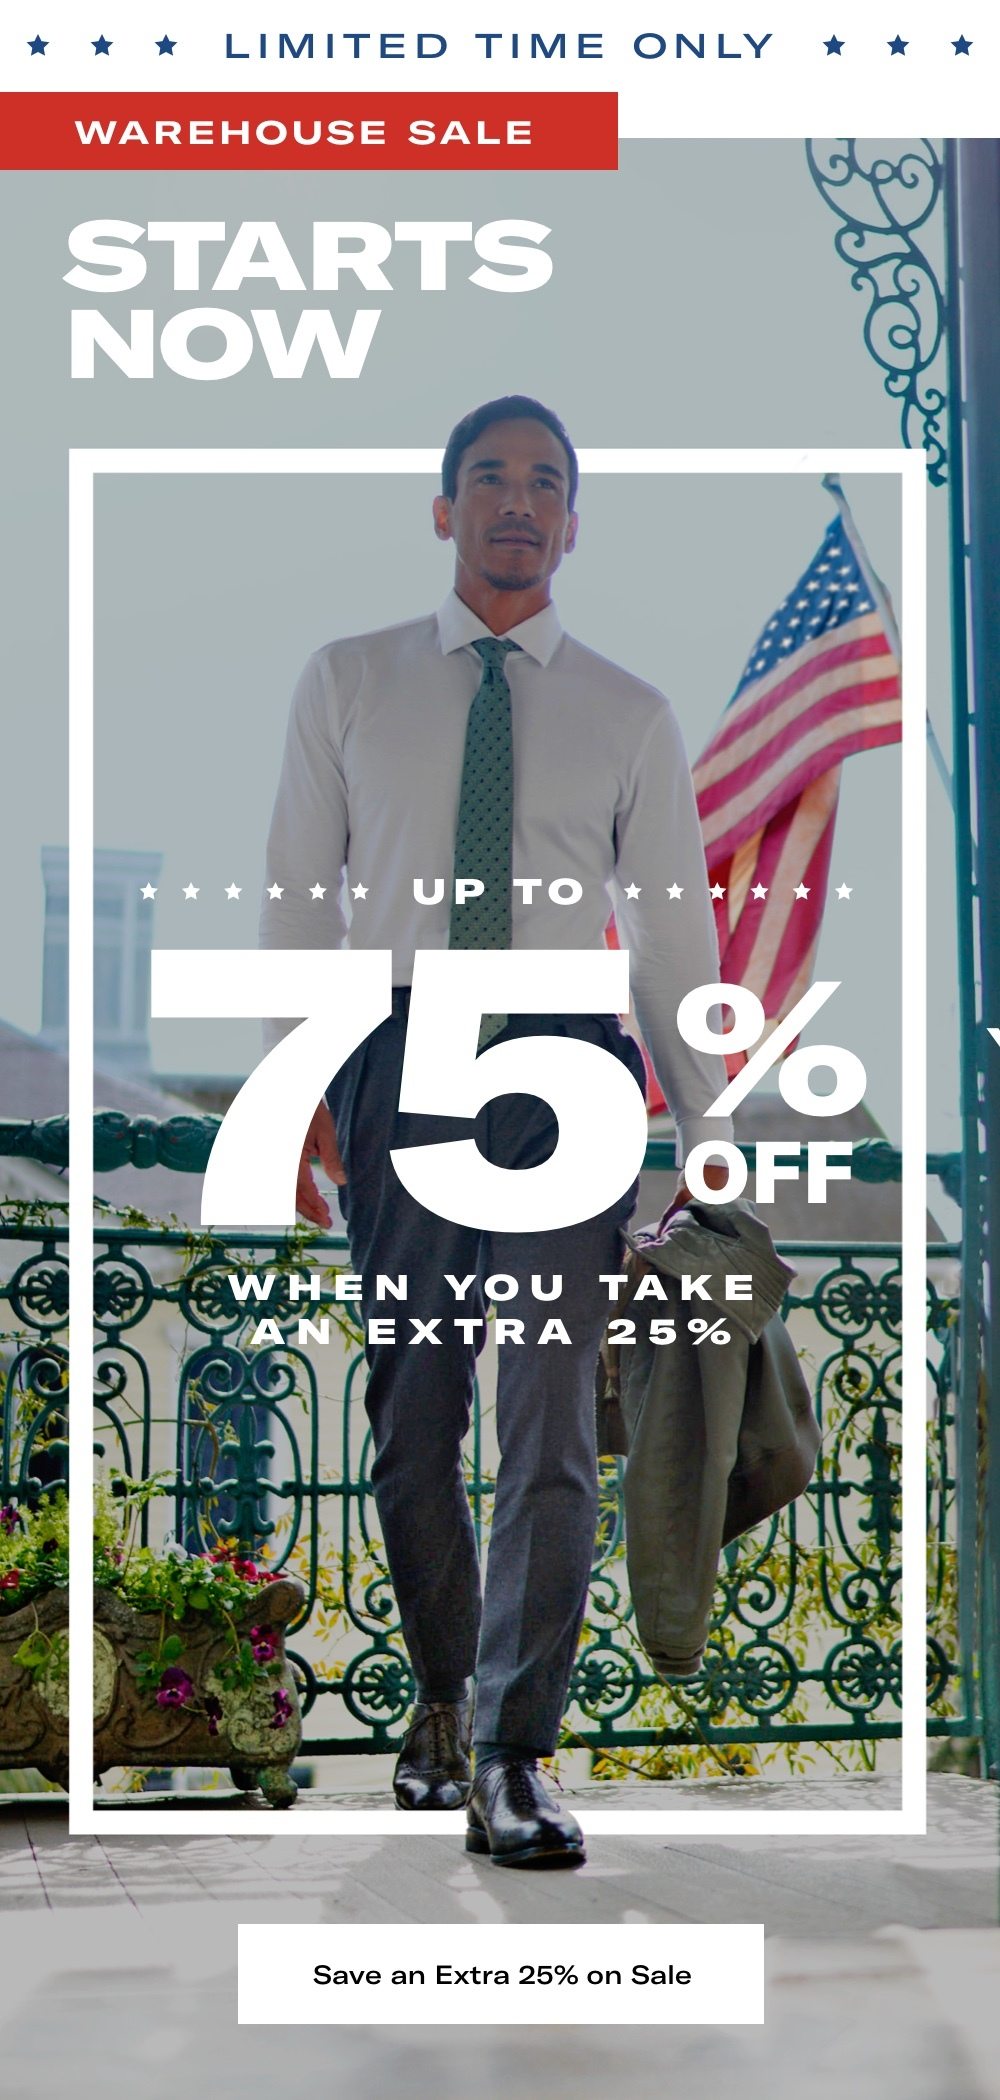 Warehouse Sale Starts Today - Save Up To 75% when you take an extra 25%